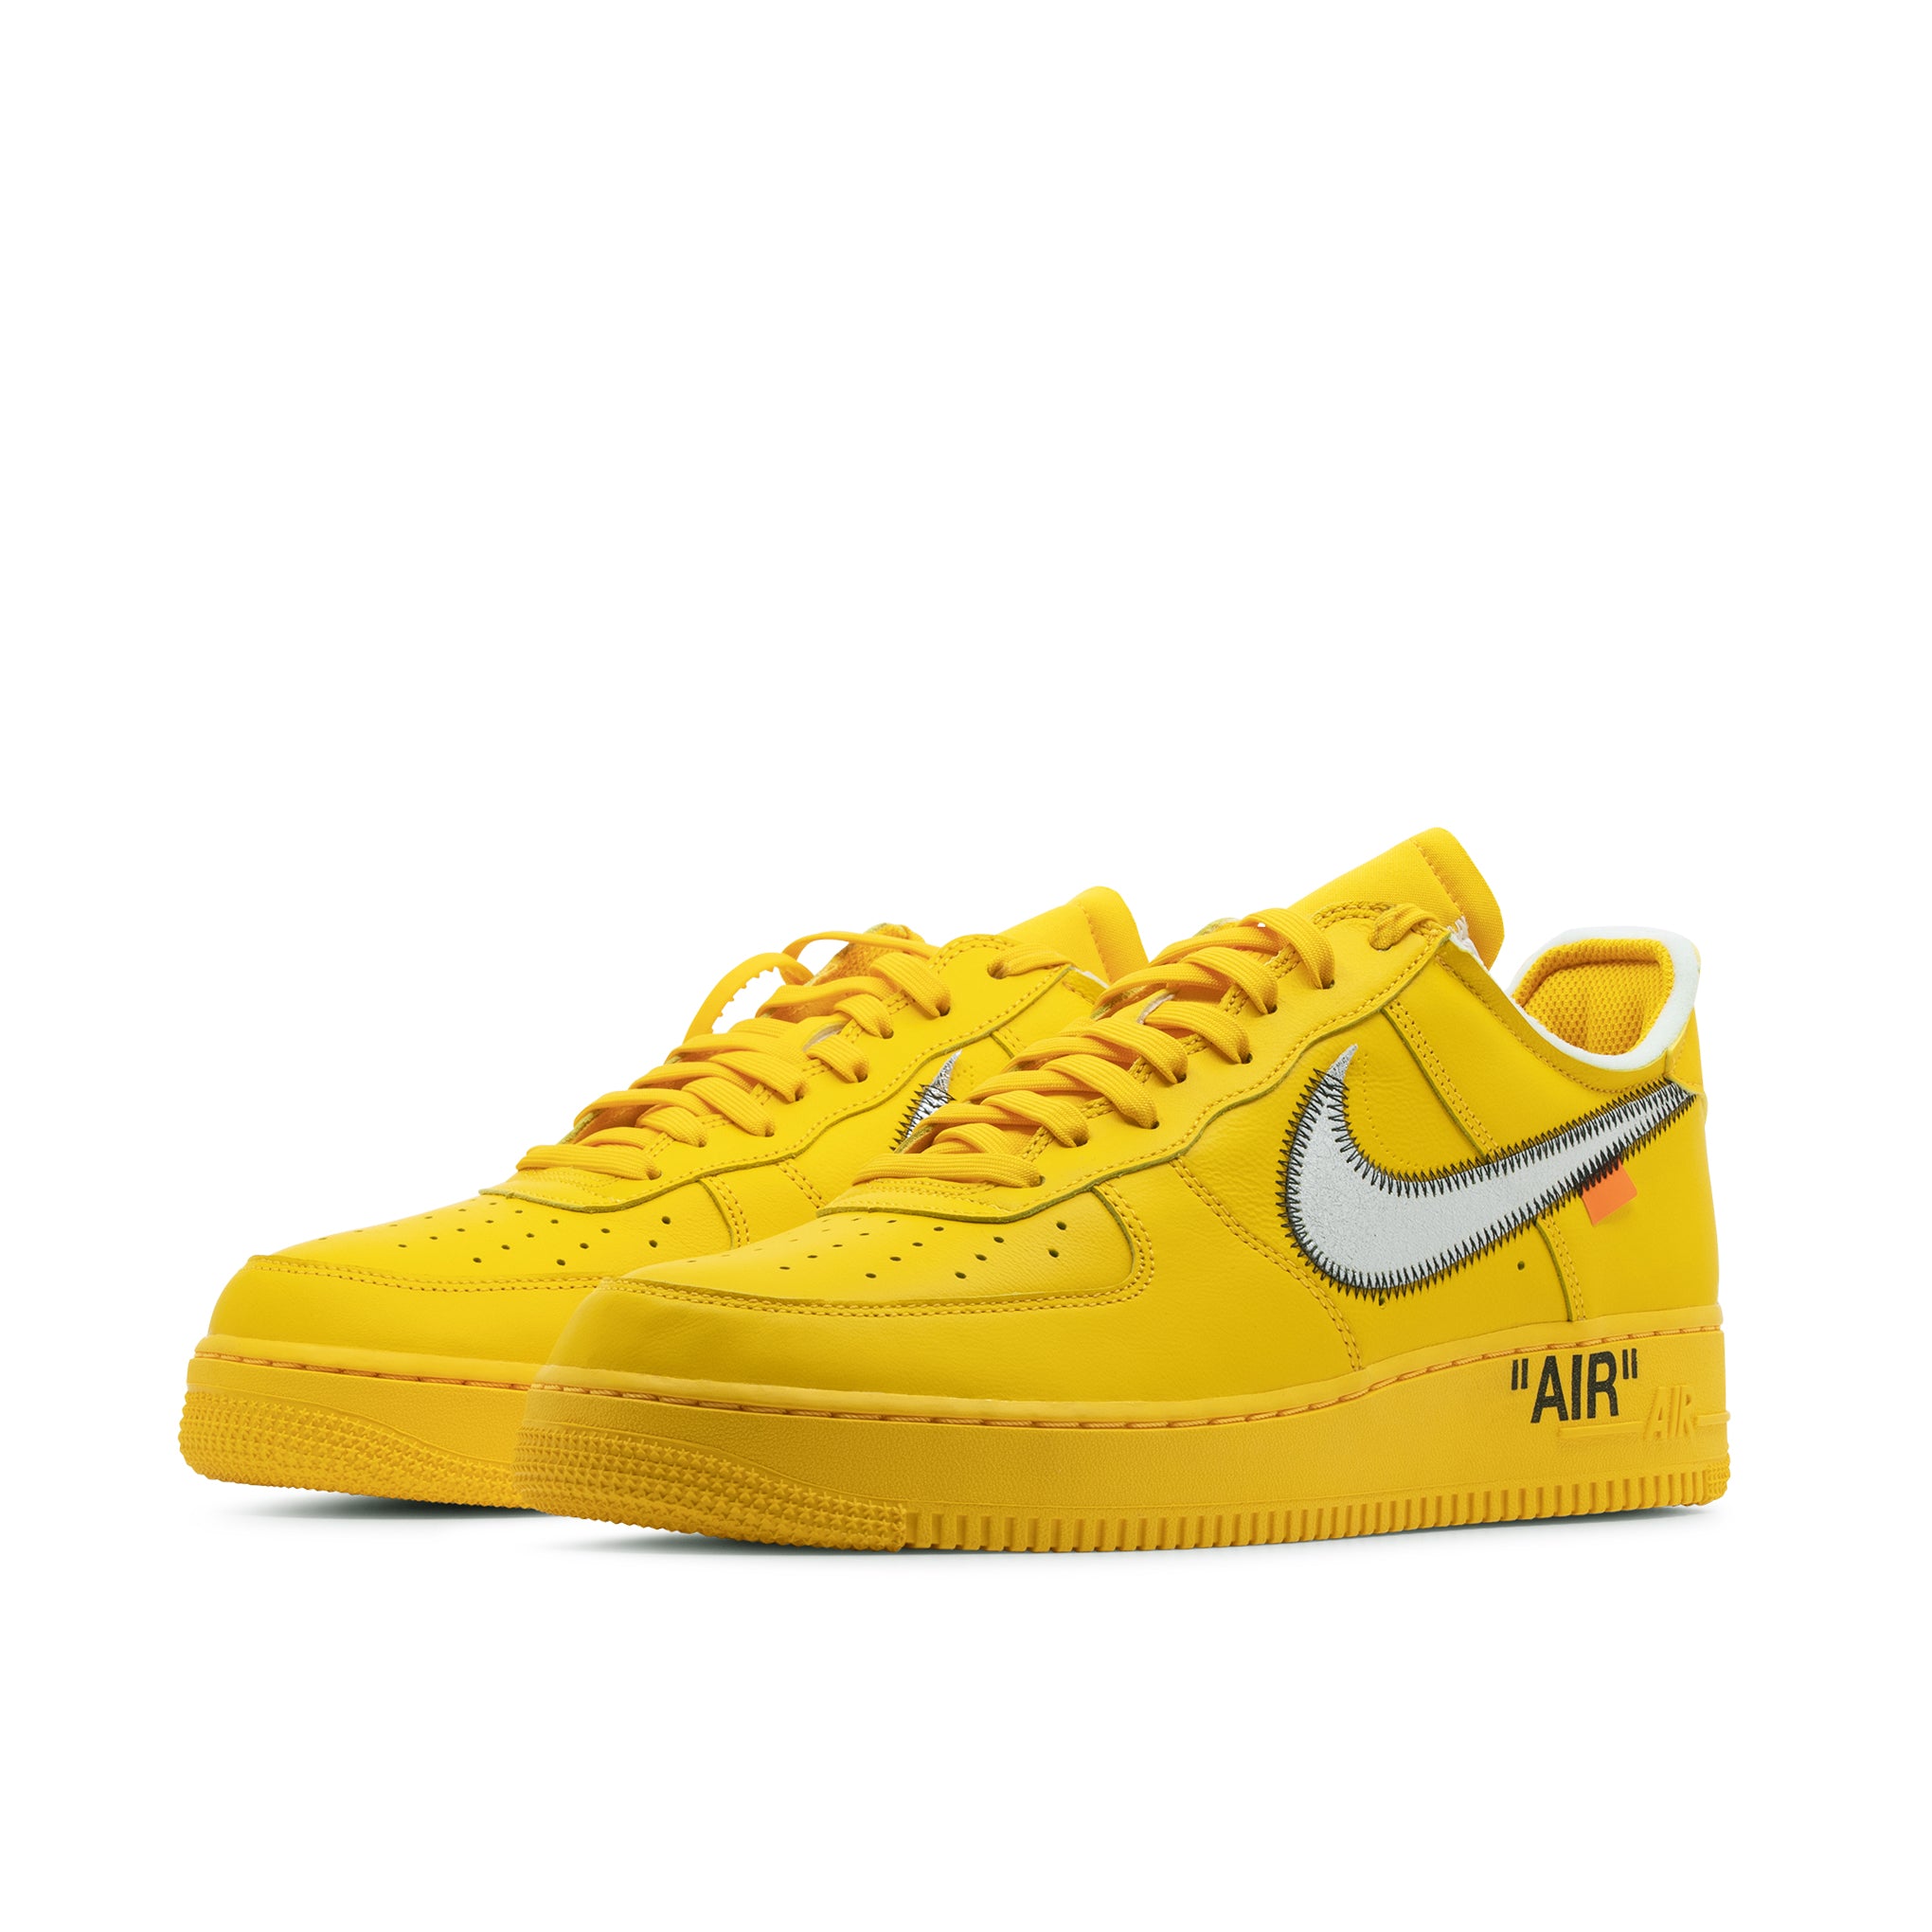 NIKE AIR FORCE 1 LOW OFF-WHITE UNIVERSITY GOLD